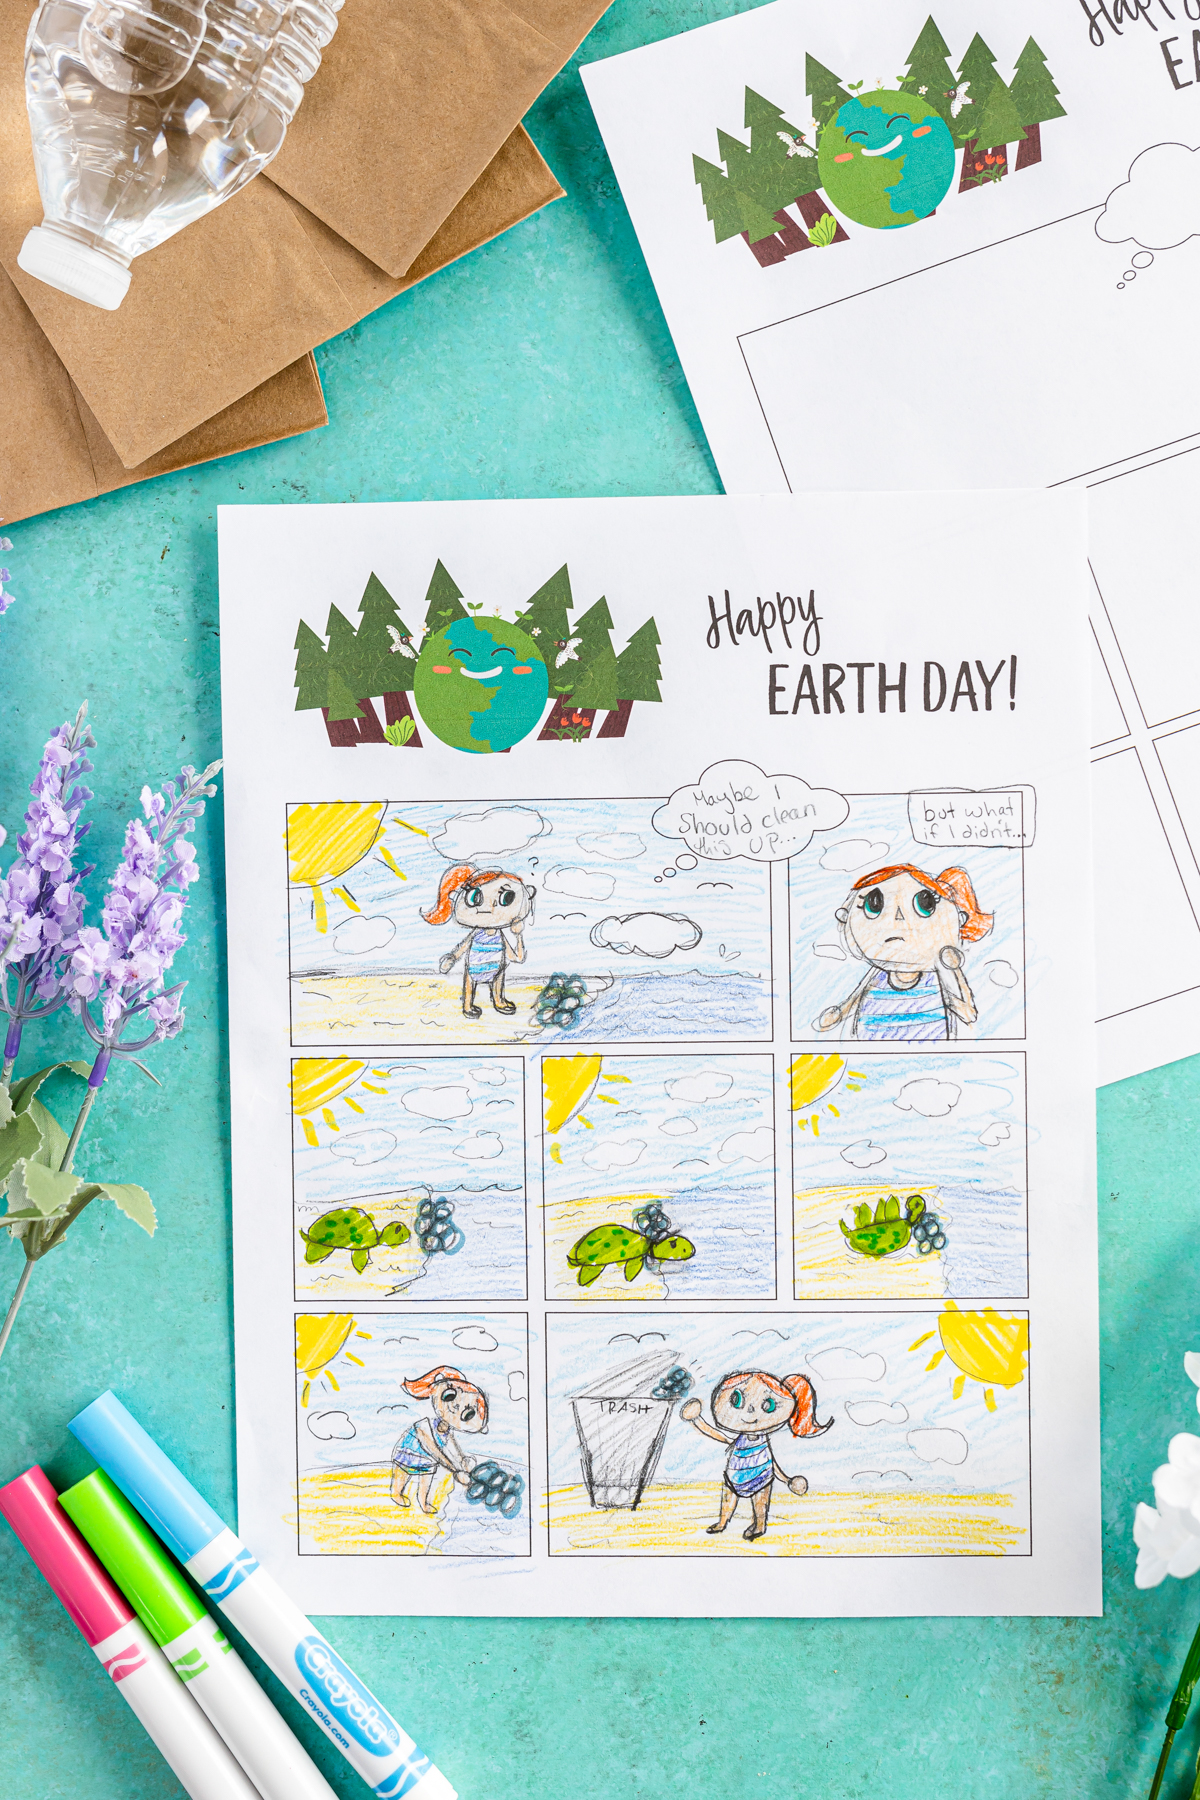 Earth Day comic strip colored in